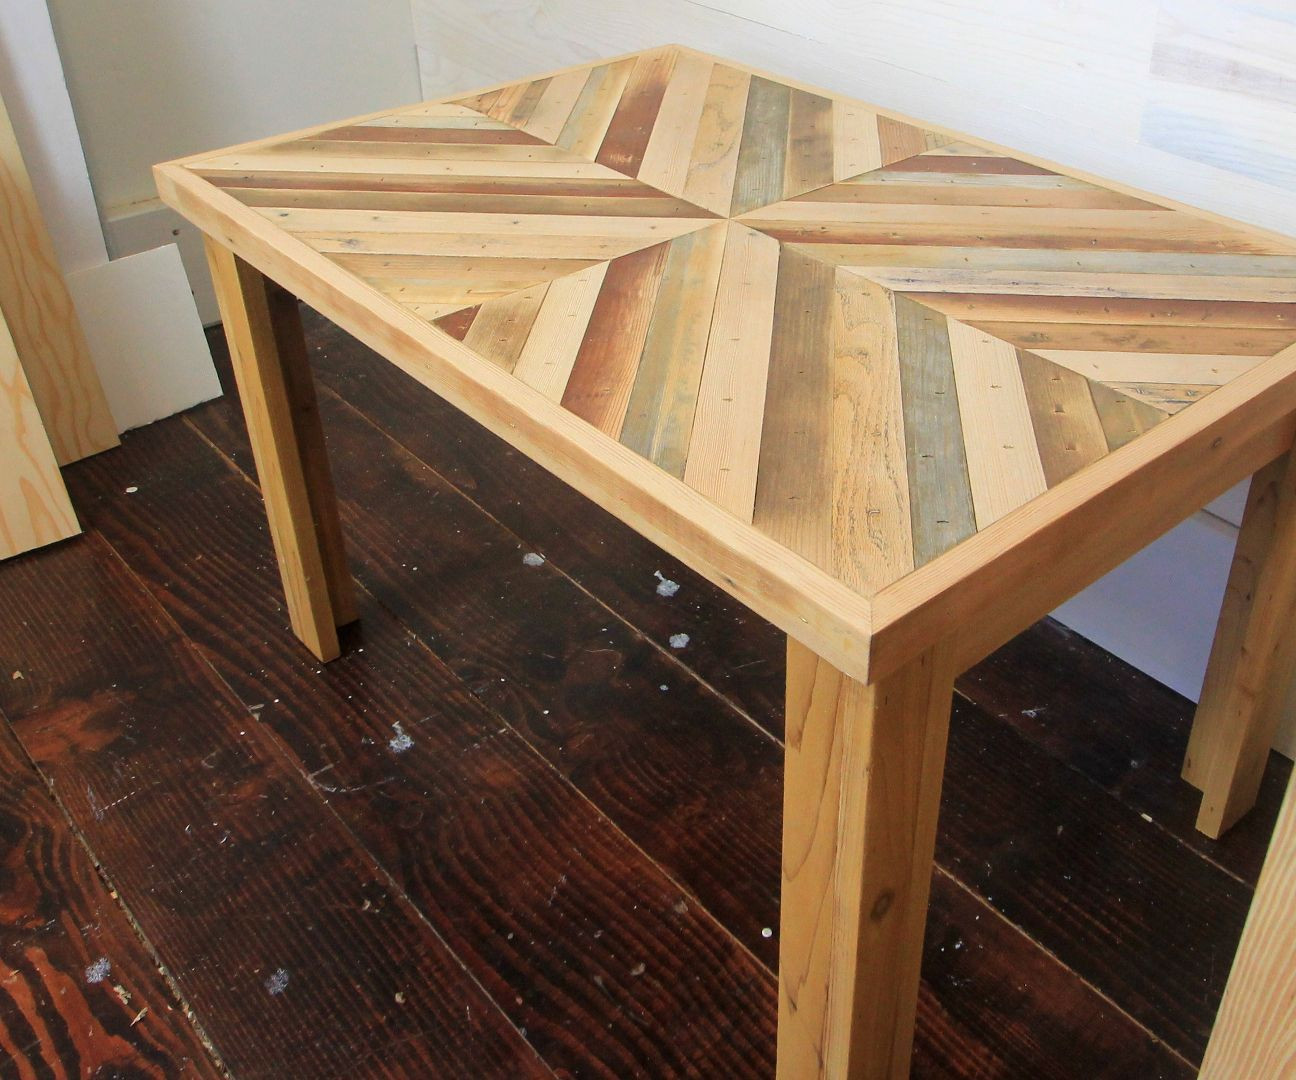 DIY Wooden Coffee Table
 DIY Rustic Style Coffee Table with Reclaimed Wood